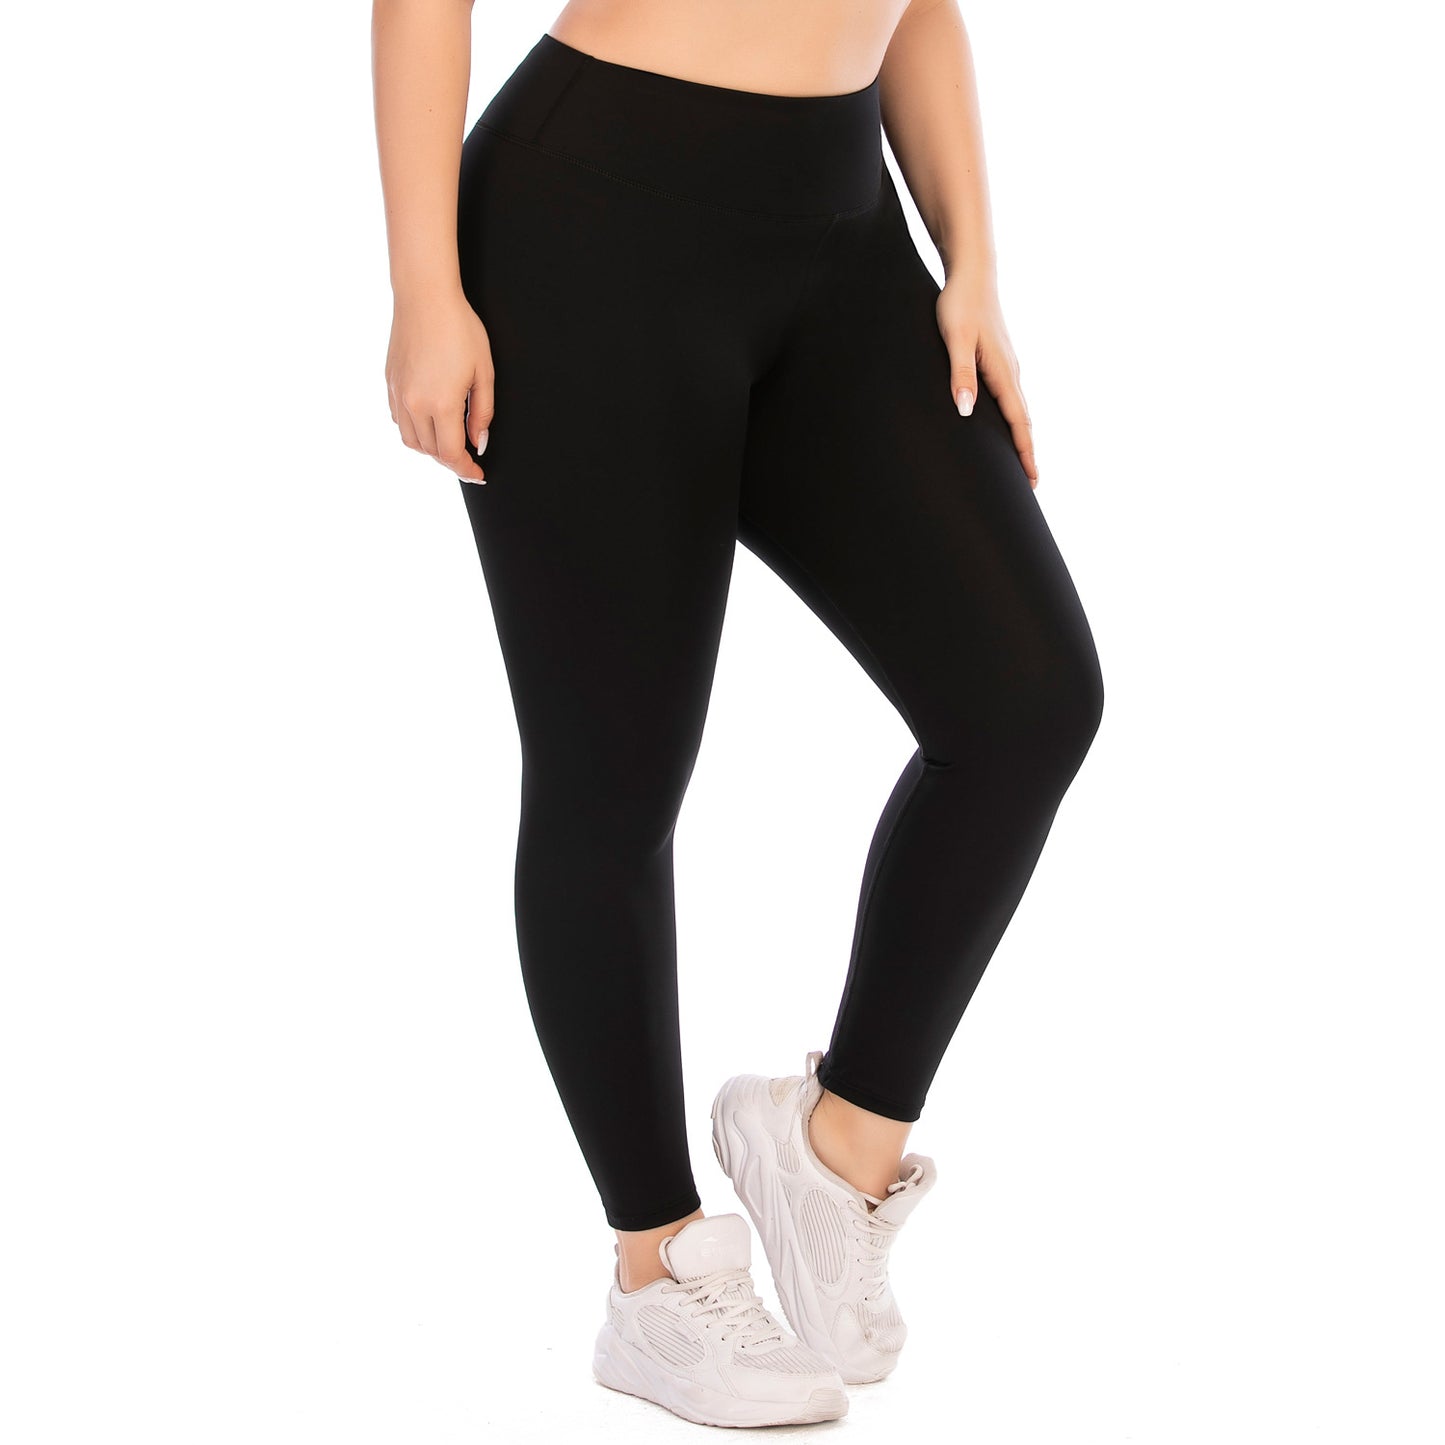 Size: 2XL, Clothes style: pants-A, Color: - Women Yoga Suit Sportswear Tracksuit Sportsuits Plus Size For Female Gym Sport Running Sets Big Large Tacking Wear Big Breast - Homreo